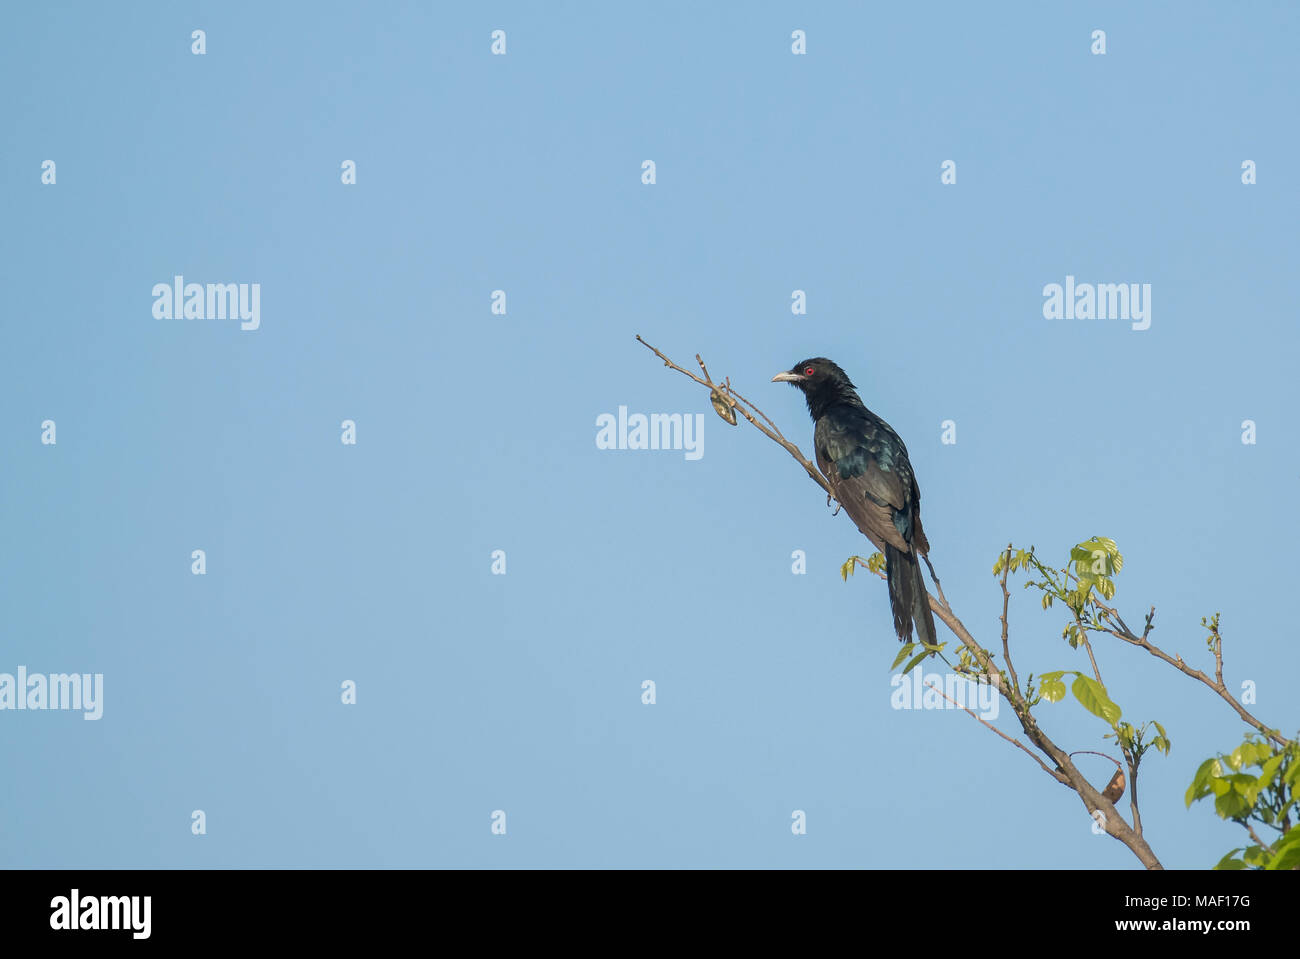 Bird: Male of Asian Koel Perched on a Branch. Stock Photo